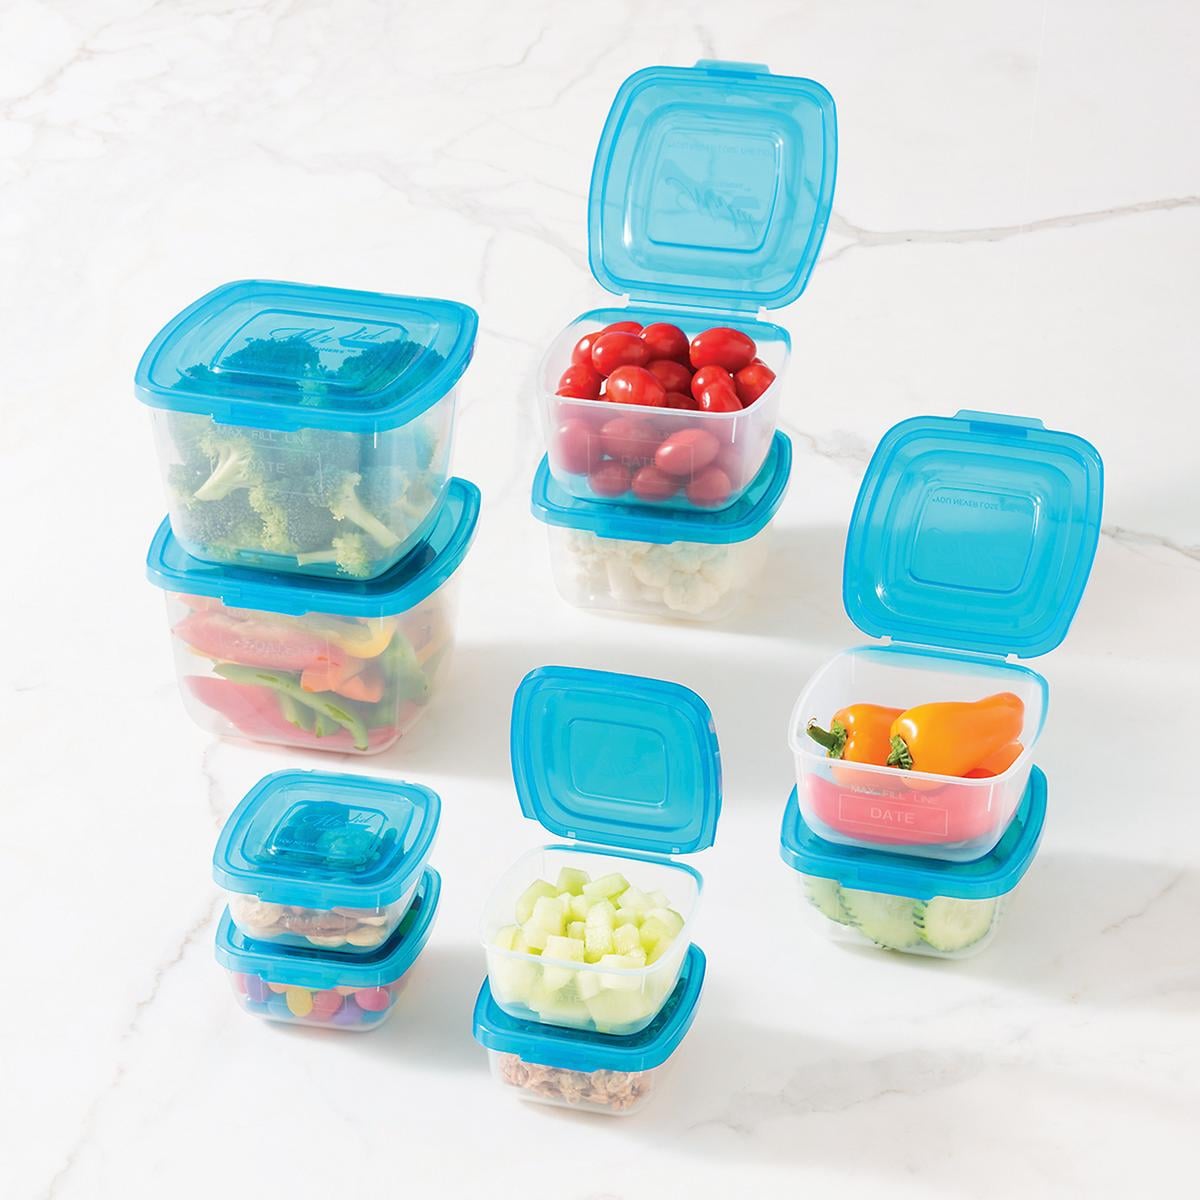 The Best Eco-Friendly Food Storage to Use in 2020 - aSweatLife